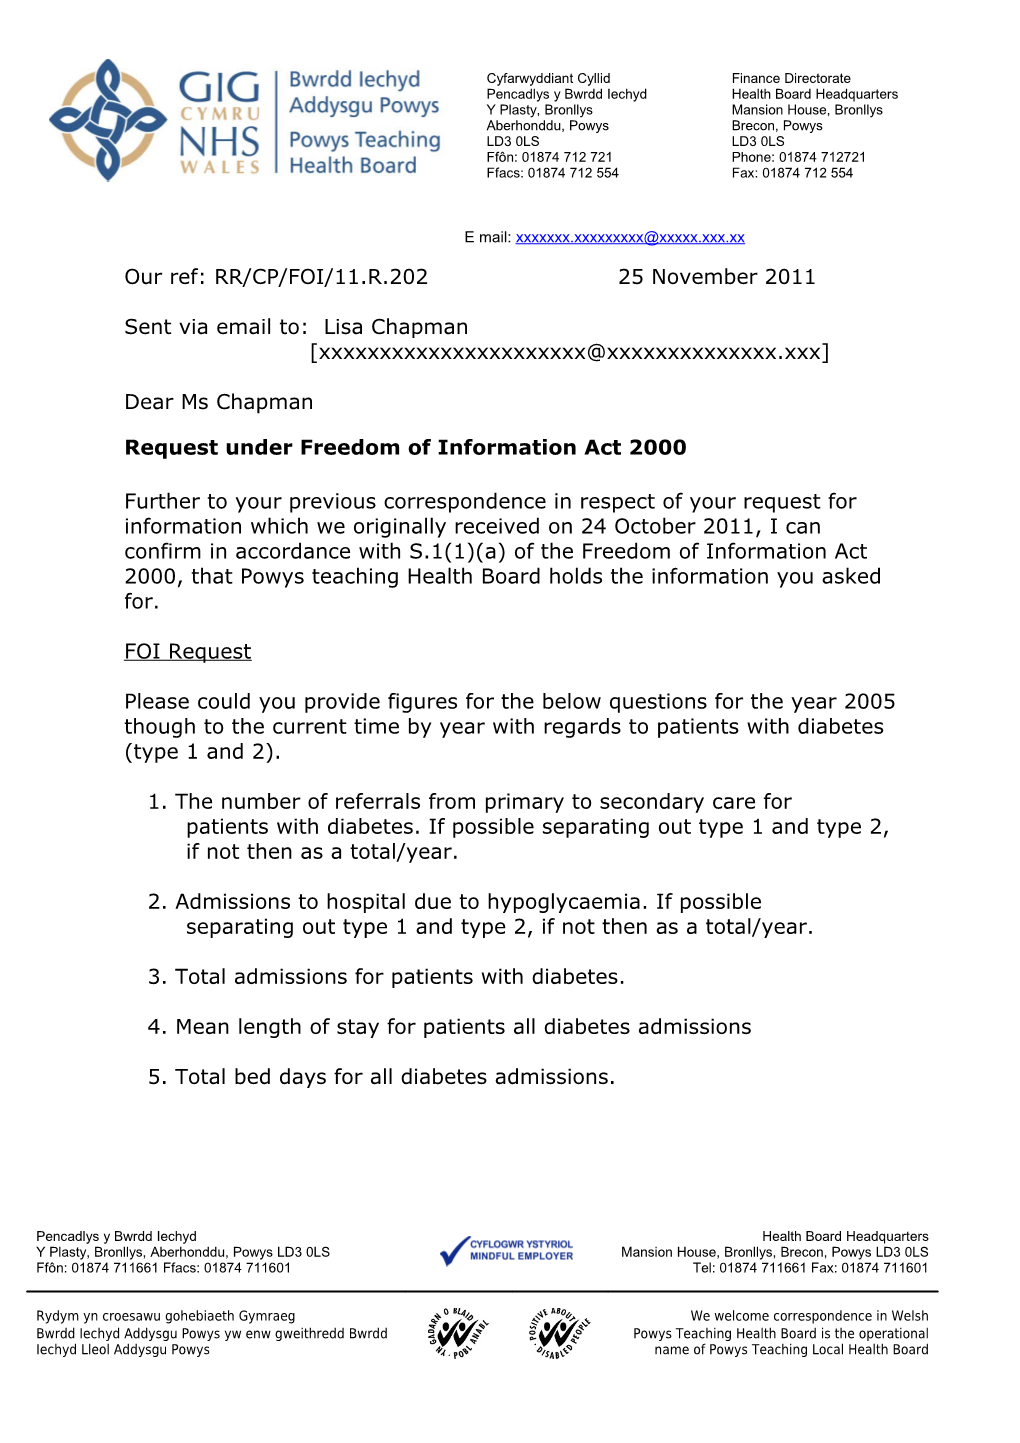 Request Under Freedom of Information Act 2000 s2